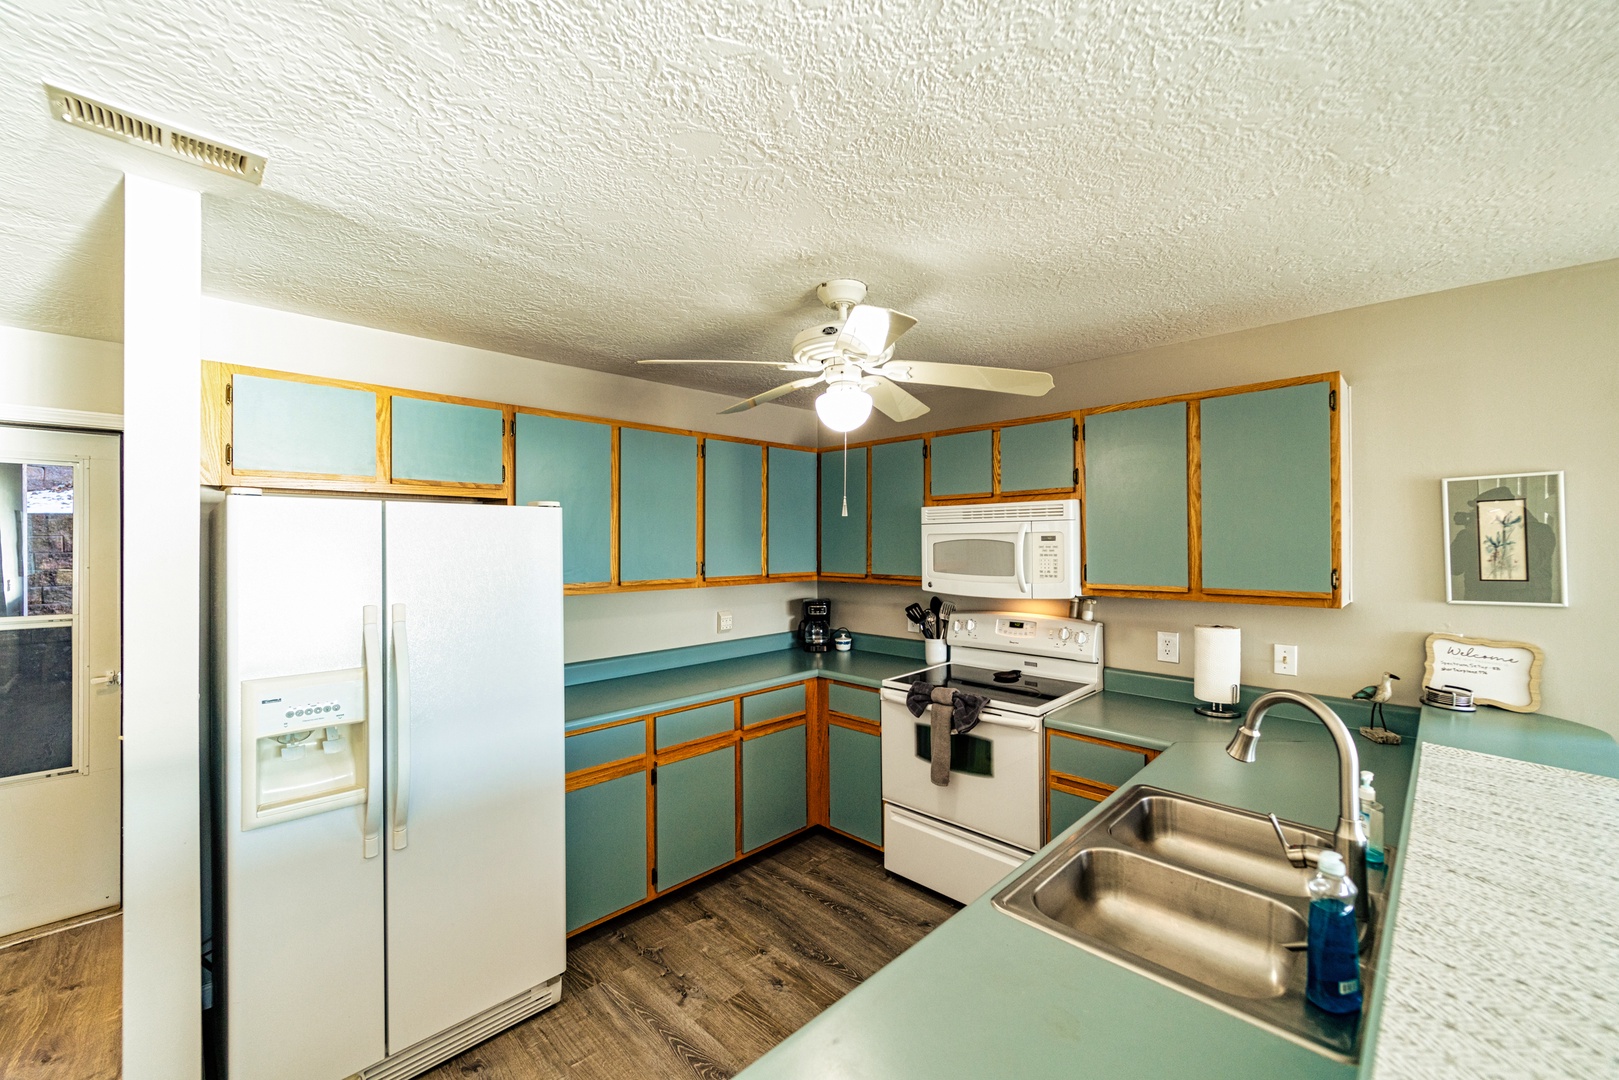 This quaint kitchen offers ample space & all the comforts of home?